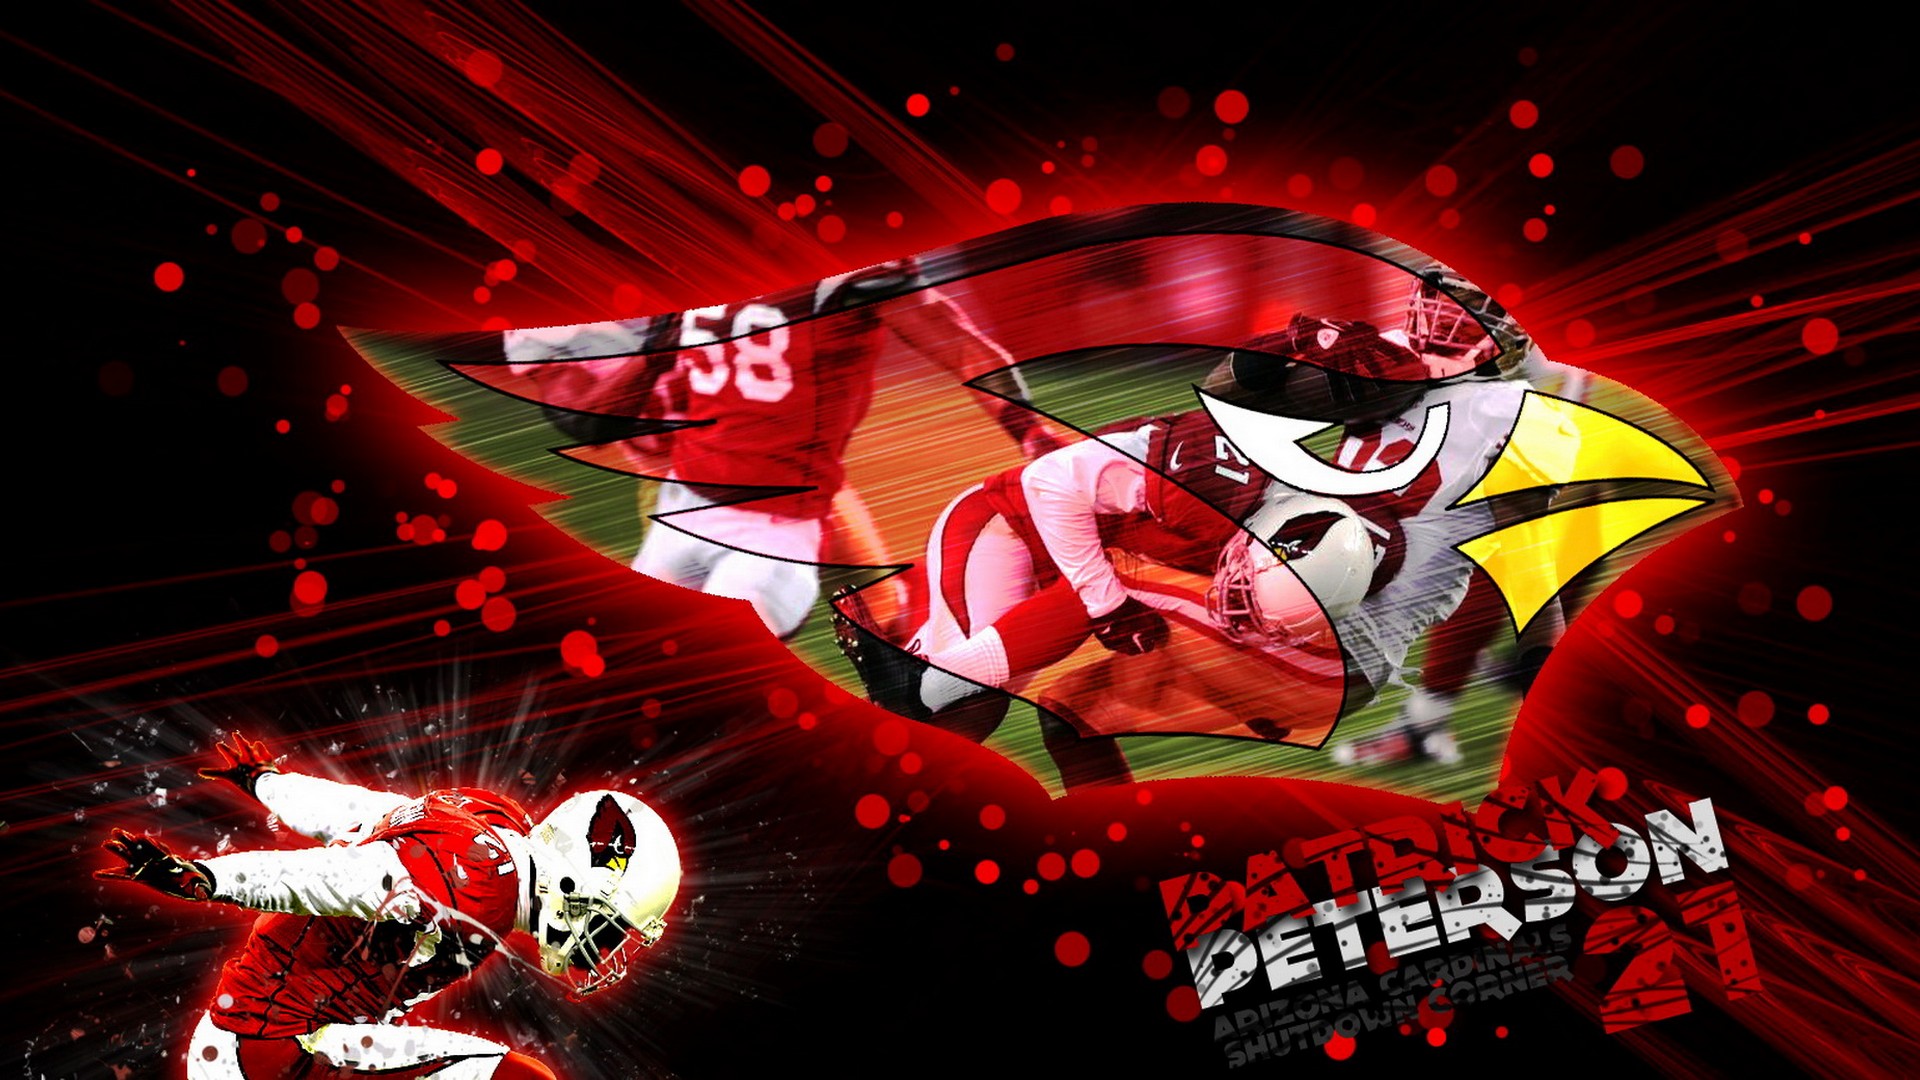 Wallpapers Cardinals With high-resolution 1920X1080 pixel. You can use this wallpaper for your Mac or Windows Desktop Background, iPhone, Android or Tablet and another Smartphone device